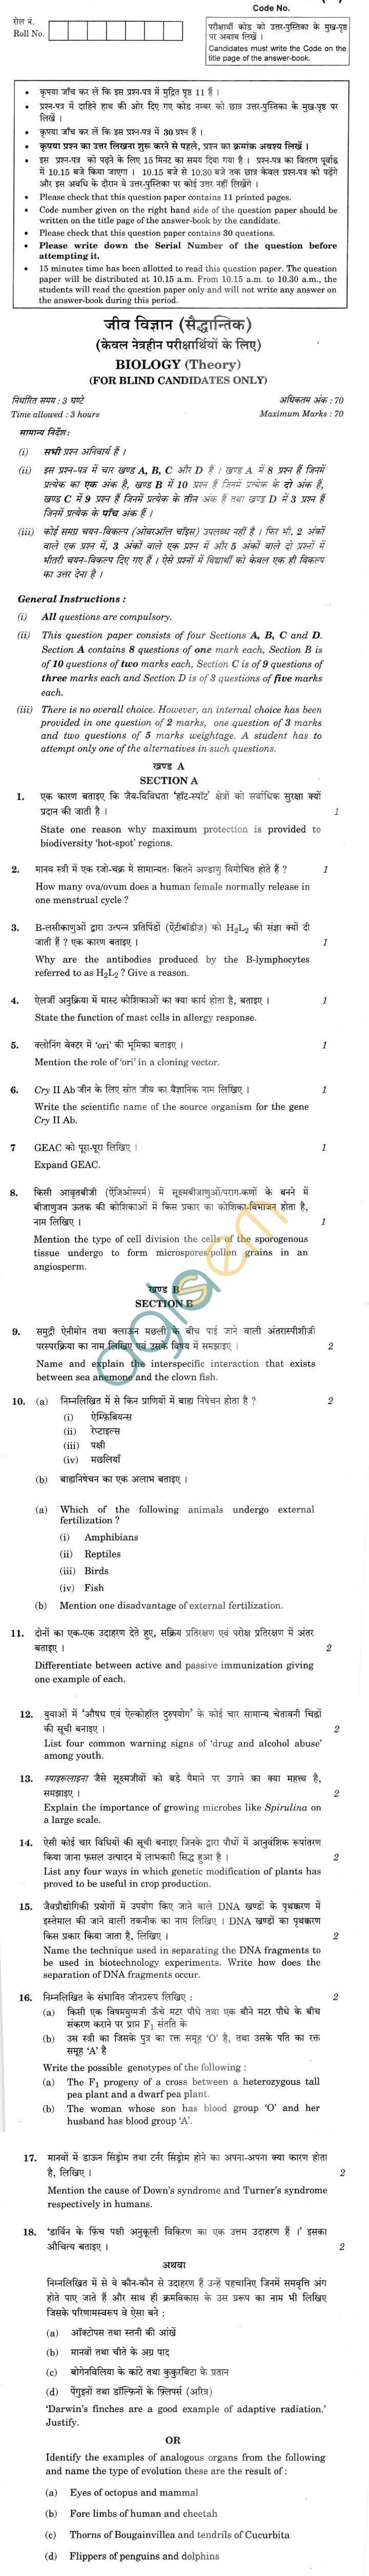 CBSE Compartment Exam 2013 Class XII Question Paper - Biology for Blind Candidate